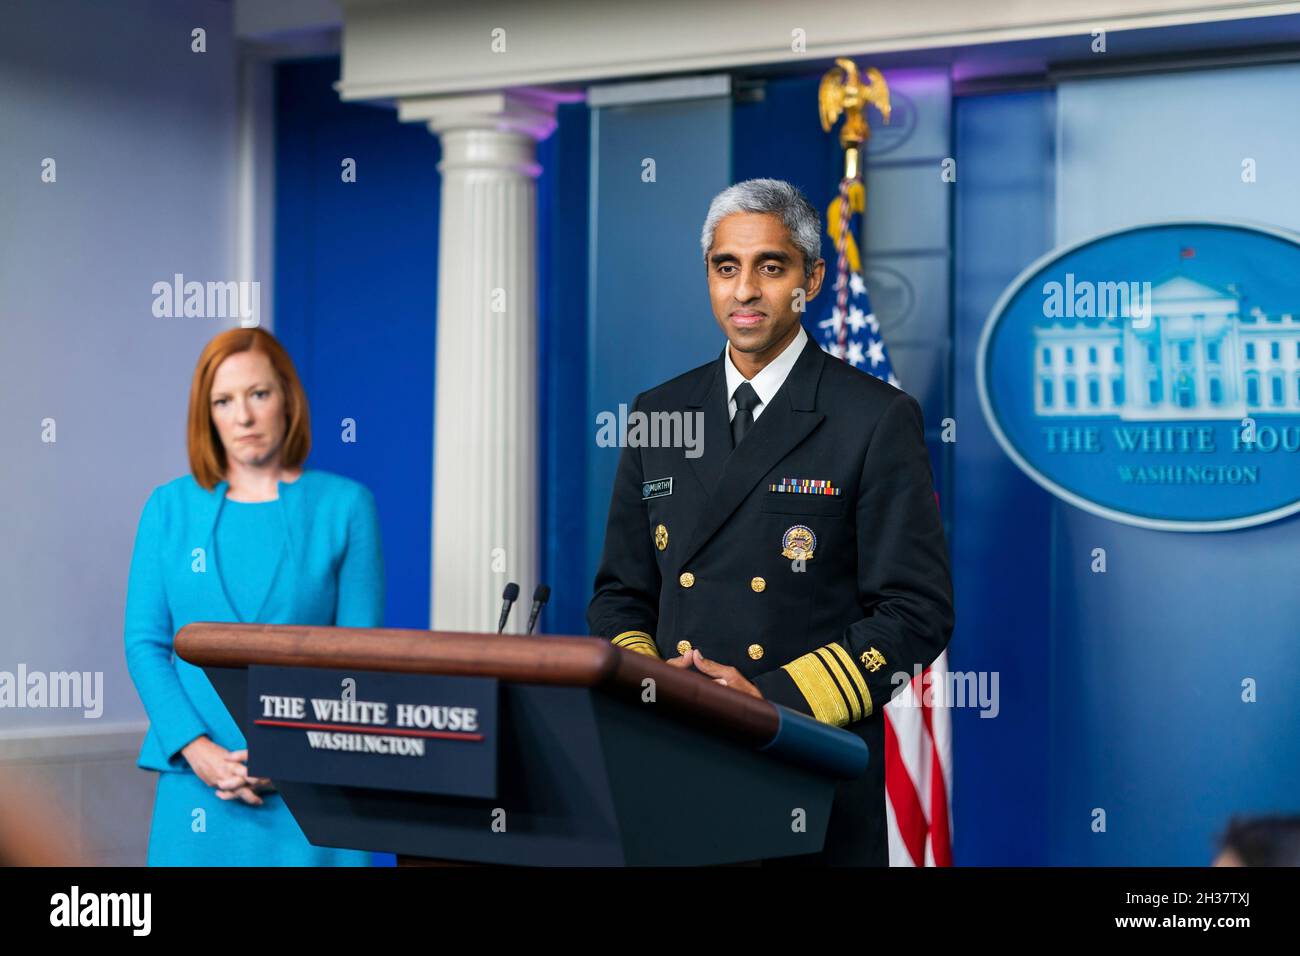 Washington, United States of America. 15 July, 2021. U.S. Surgeon General Vivek Murthy, joined by Press Secretary Jen Psaki, delivers remarks and answers questions on vaccines and the Covid-19 pandemic during the daily press briefing in the James Brady Briefing Room at the White House, July 15, 2021 in Washington, D.C. Credit: Cameron Smith/White House Photo/Alamy Live News Stock Photo